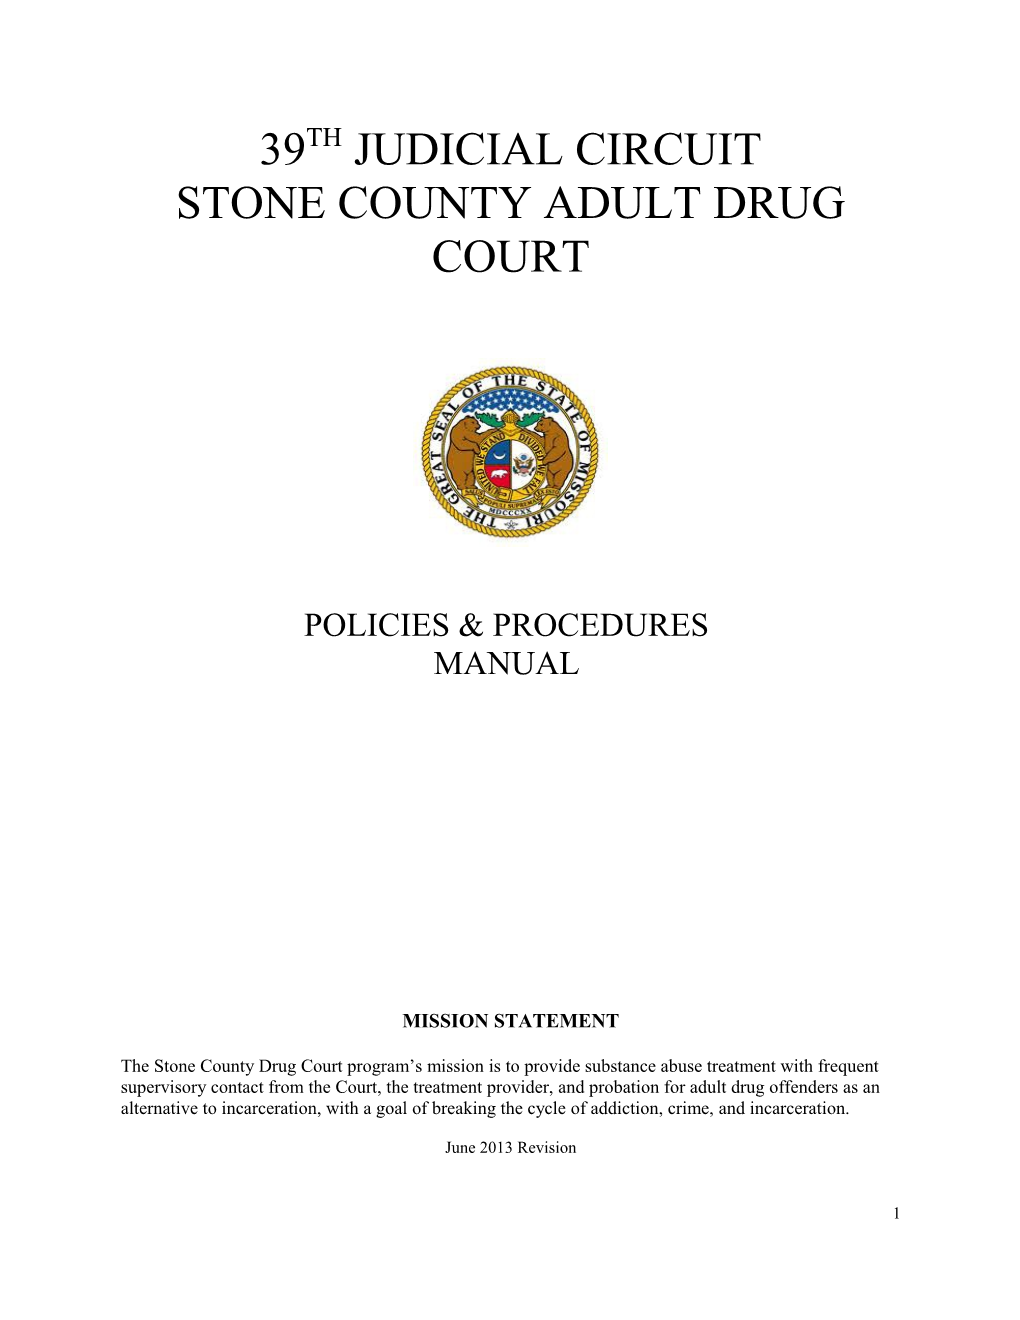 Stone County Adult Drug Court